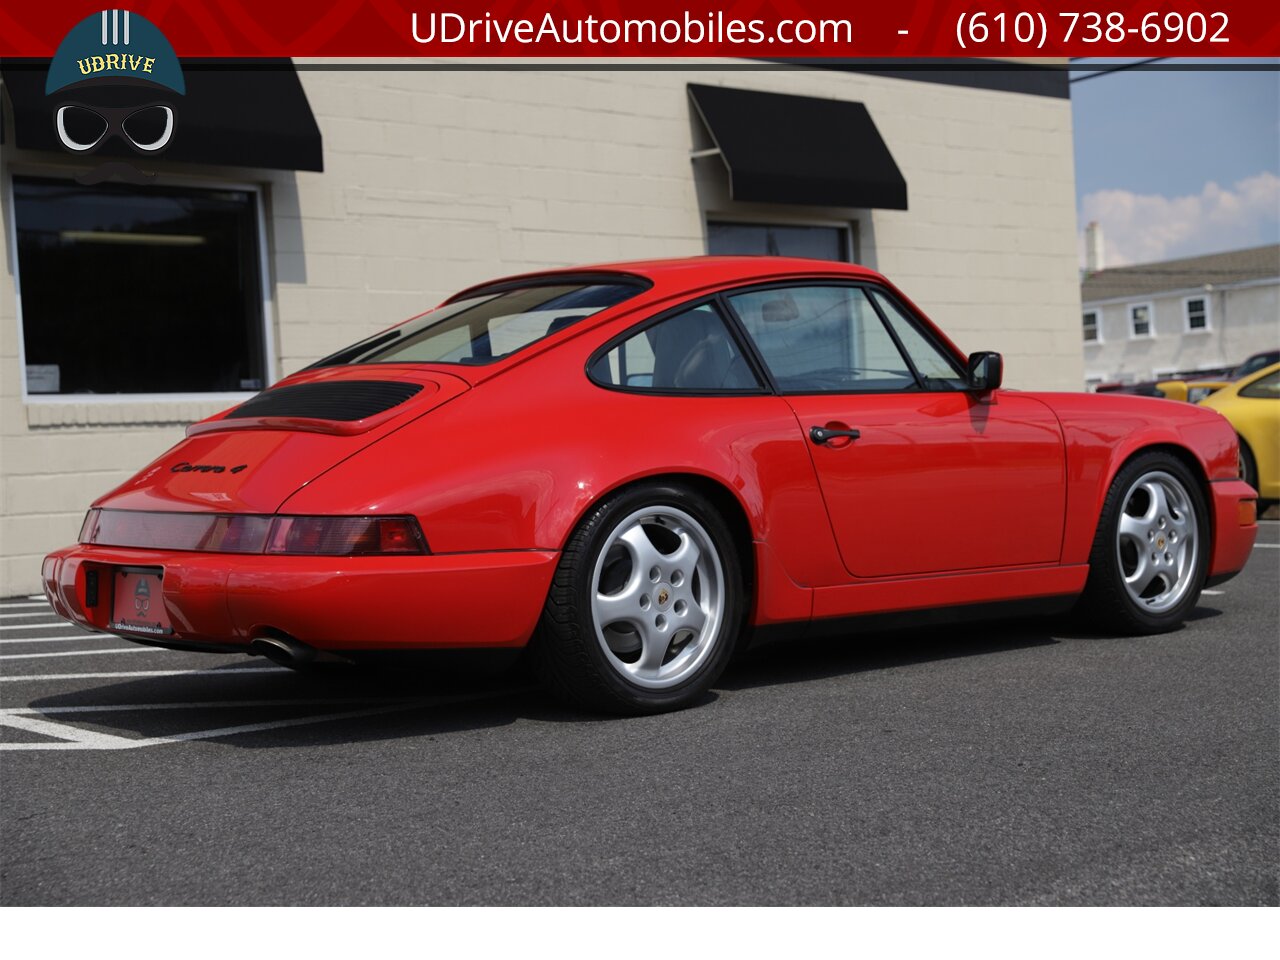 1989 Porsche 911 Carrera 4 964 C4 5 Speed Engine Rebuild  $40k in Service History Cup 1 Wheels - Photo 15 - West Chester, PA 19382